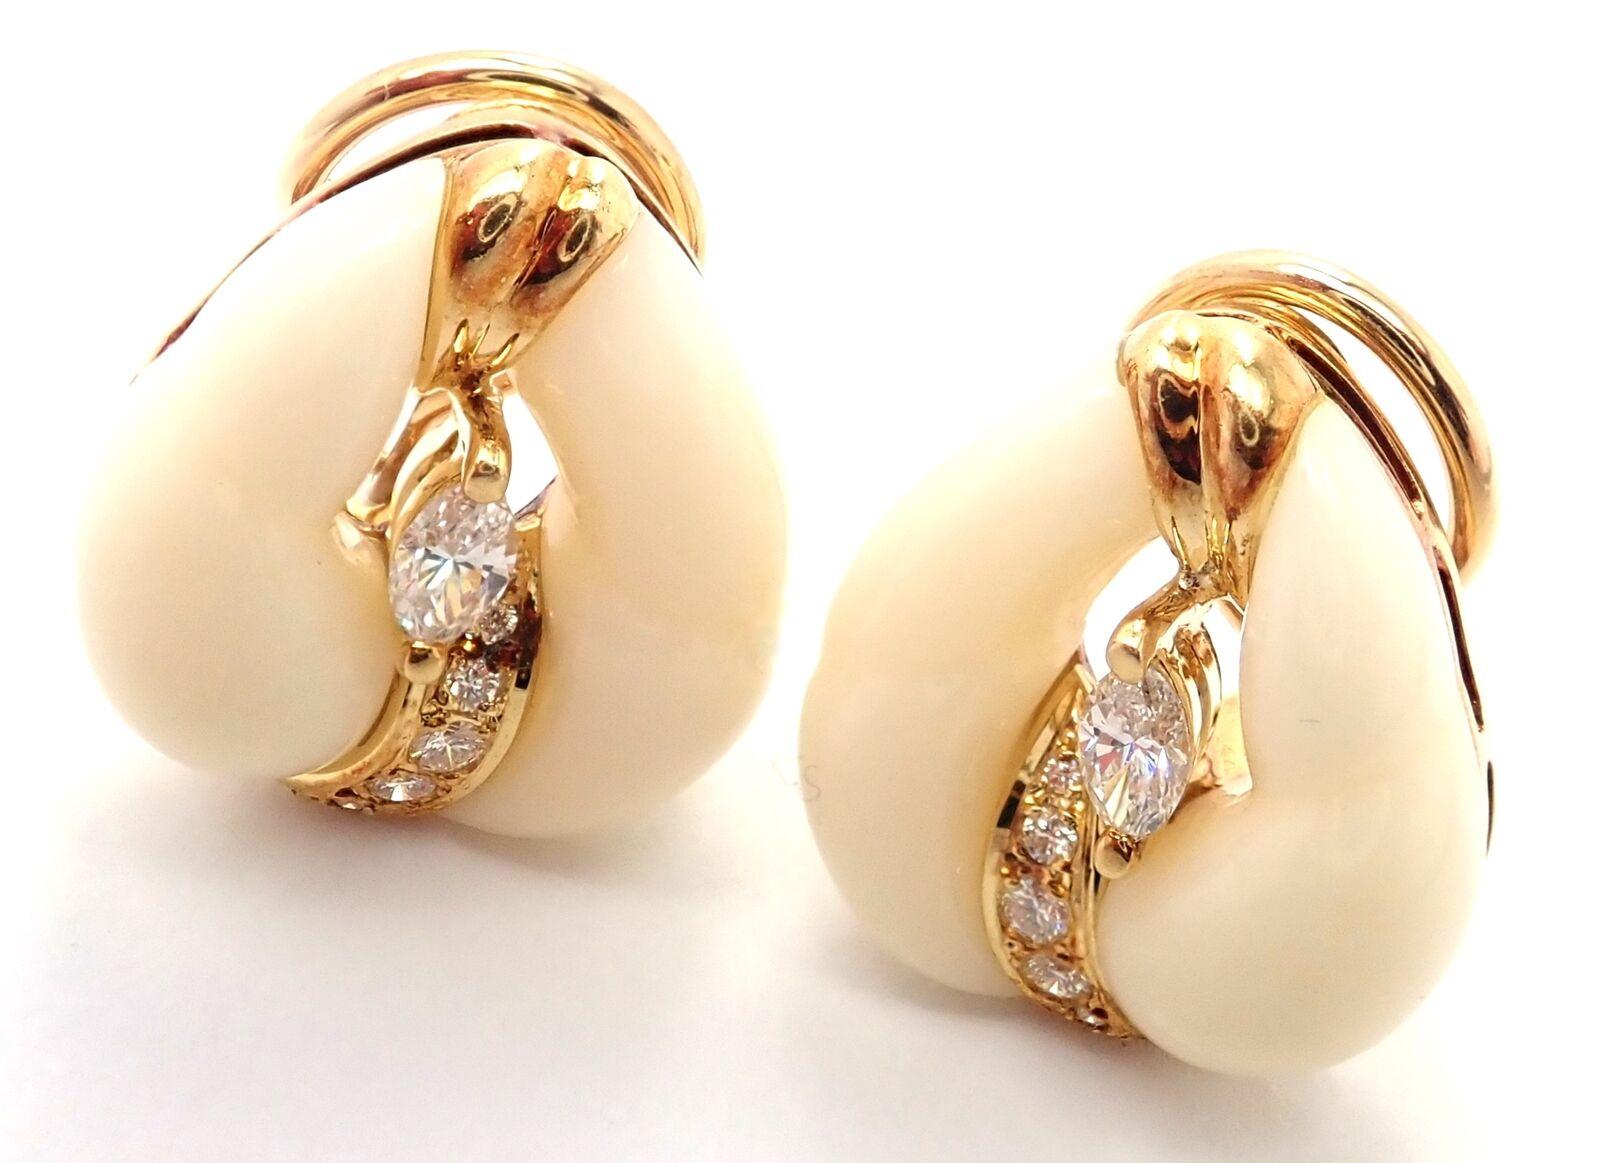 18k Yellow Gold Diamond White Coral Earrings by Mikimoto. 
With 2 marque shape diamonds and 10 round brilliant cut diamonds VS1 clarity, E color total weight approximately .30ct
Details: 
Measurements: 19mm x 16mm
Weight: 10.4 grams
Stamped